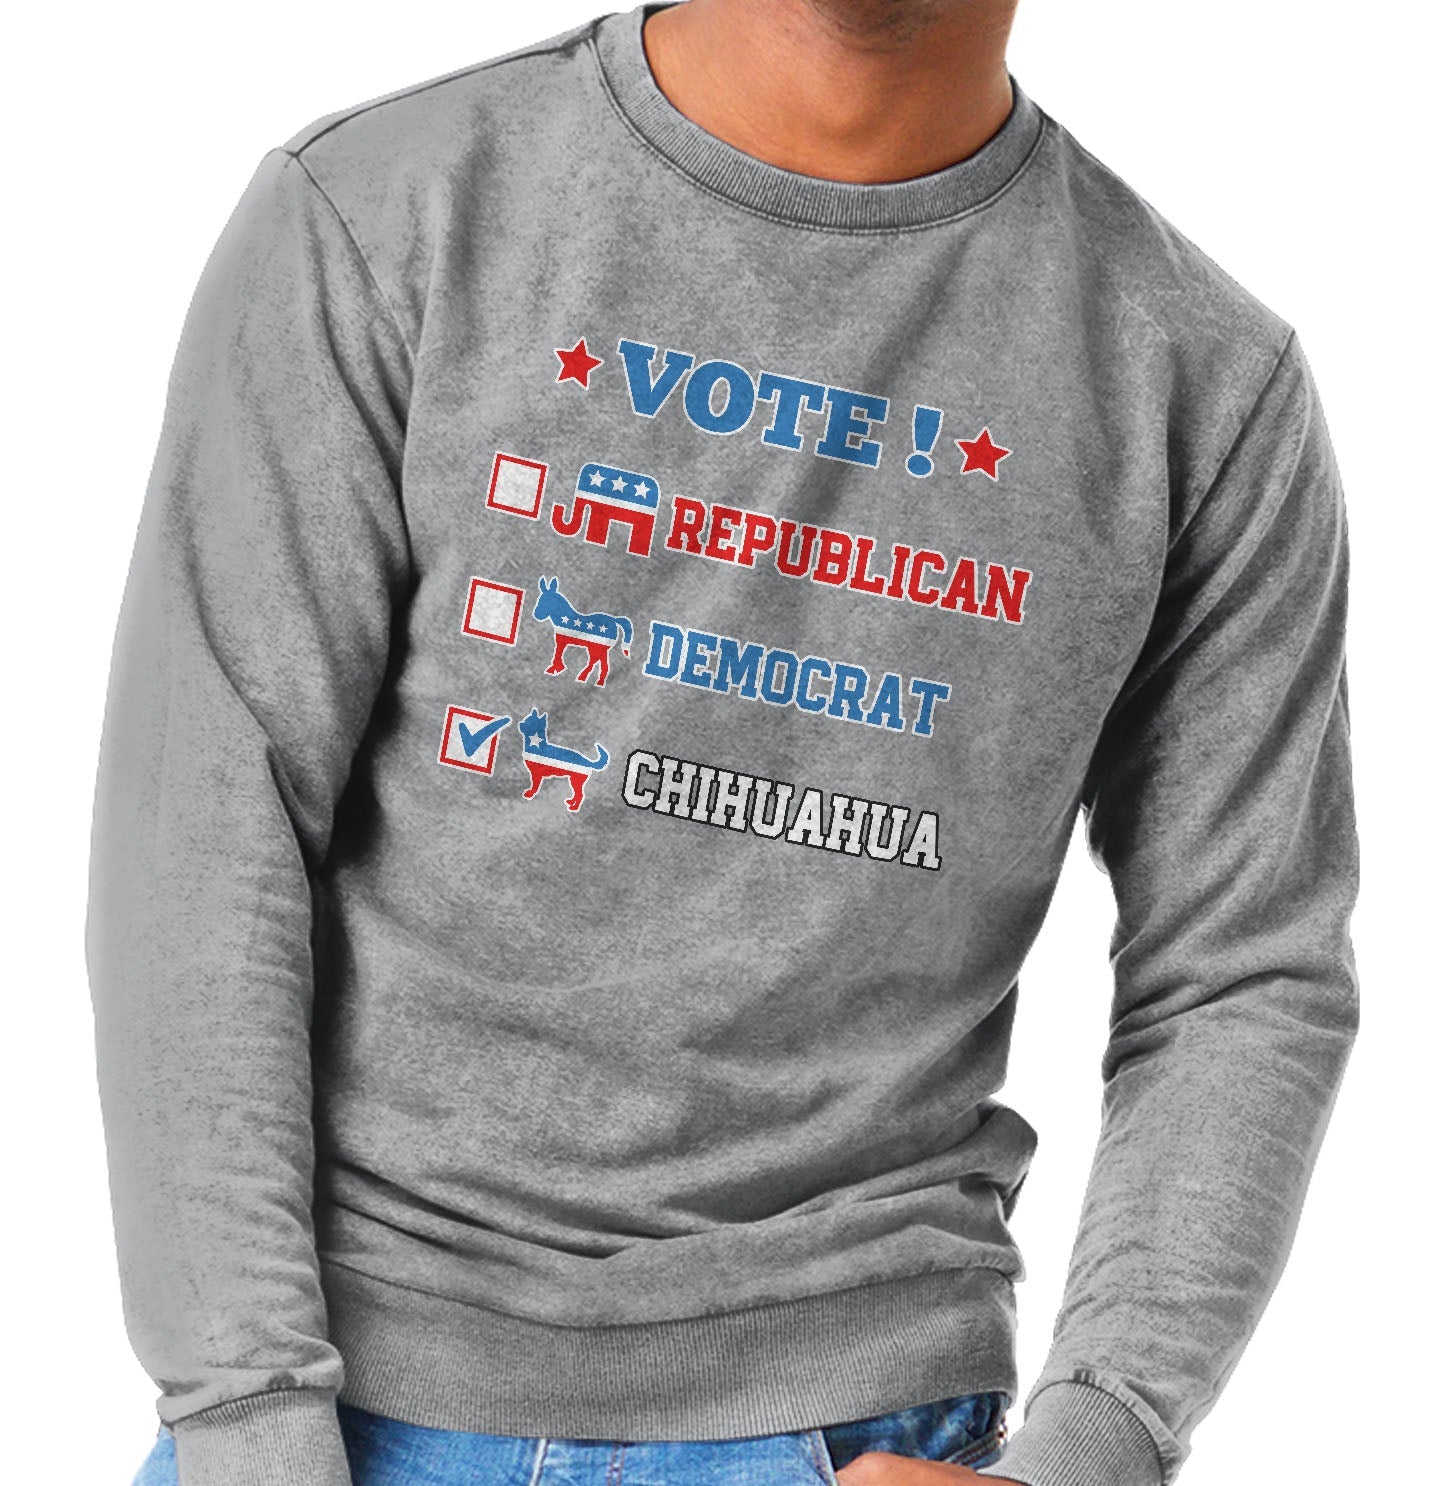 Vote for the Chihuahua (Short-Haired) - Adult Unisex Crewneck Sweatshirt